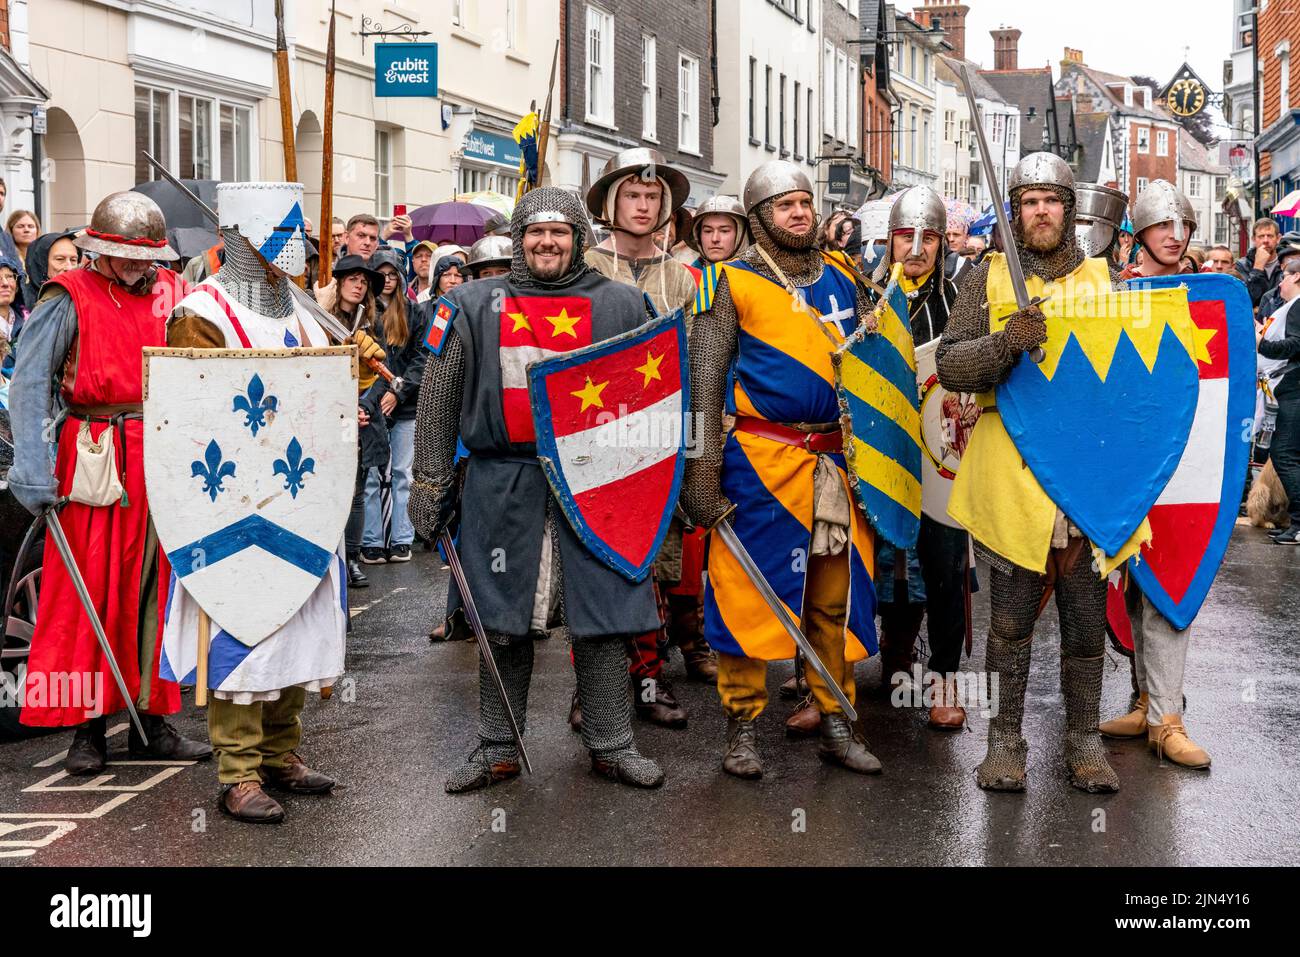 Men In Medieval Costume Prepare To Take Part In The Battle Of Lewes  Re-Enactment Event, Lewes, East Sussex, UK Stock Photo - Alamy